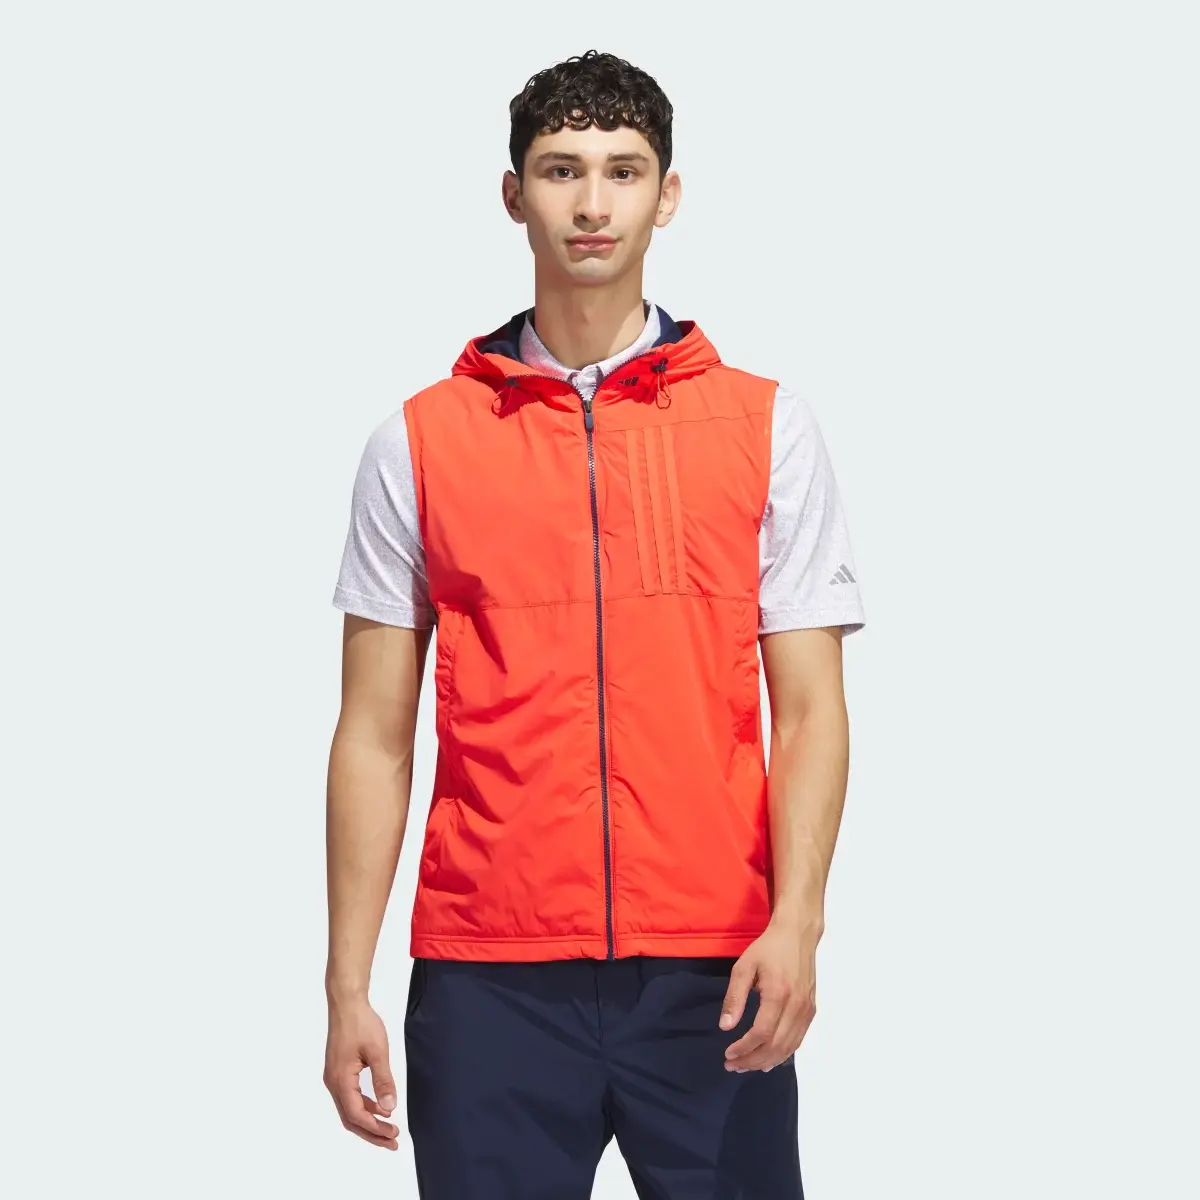 Adidas Ultimate365 Tour WIND.RDY Vest. 2